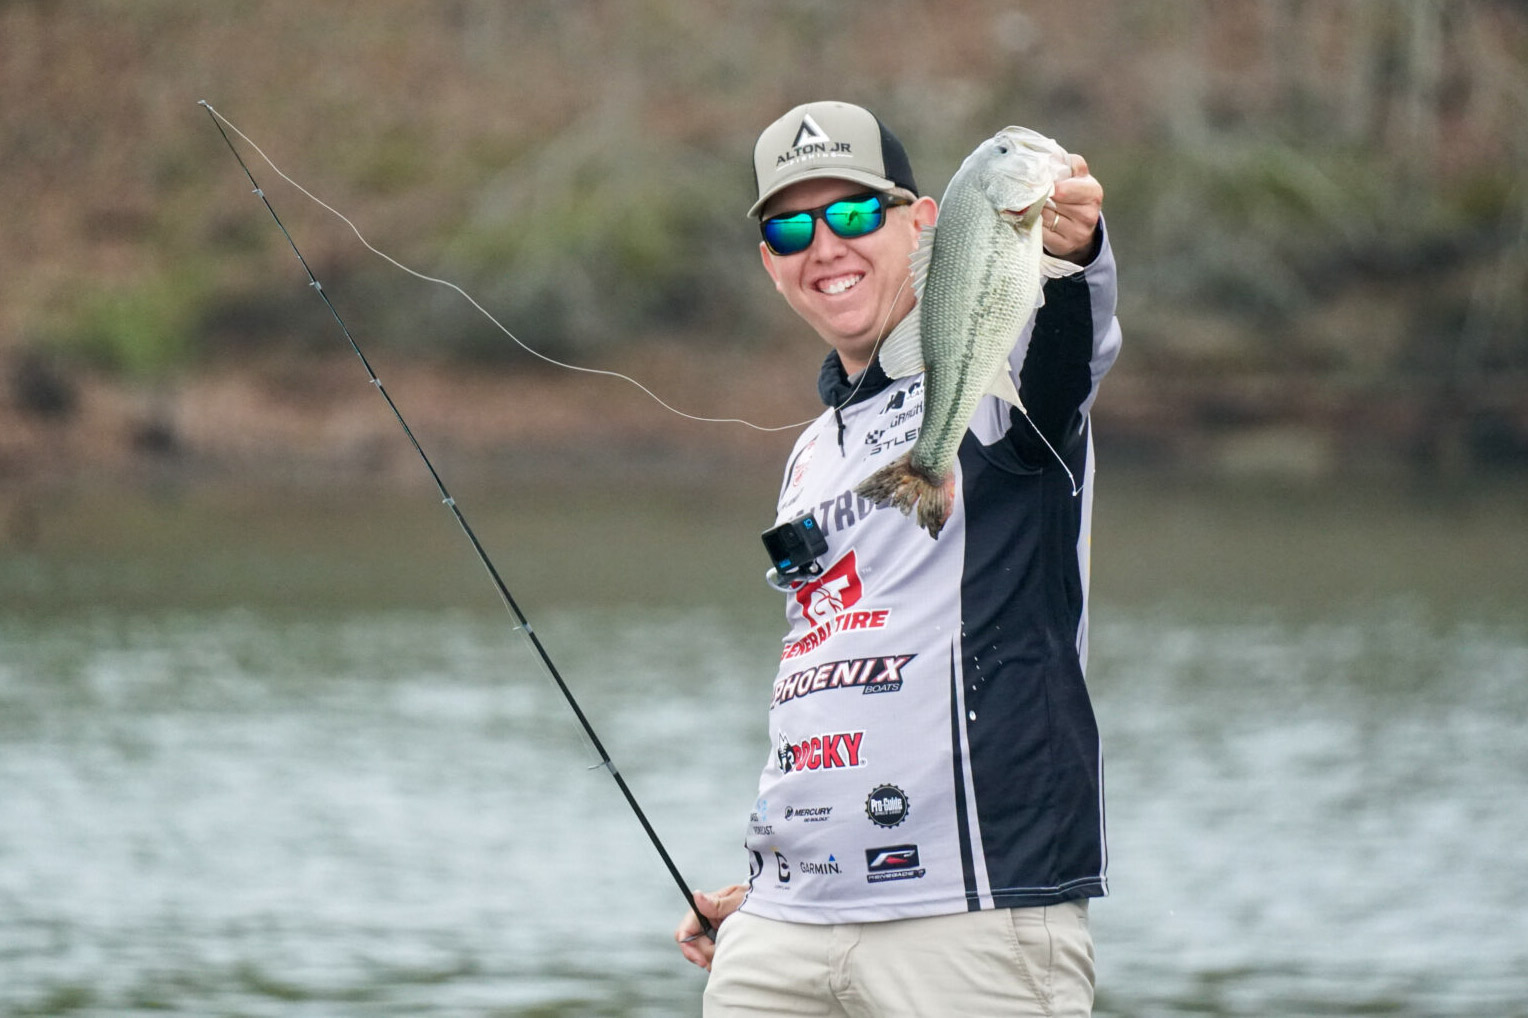 Top 10 baits and patterns: Minnow madness on Toledo Bend - Major